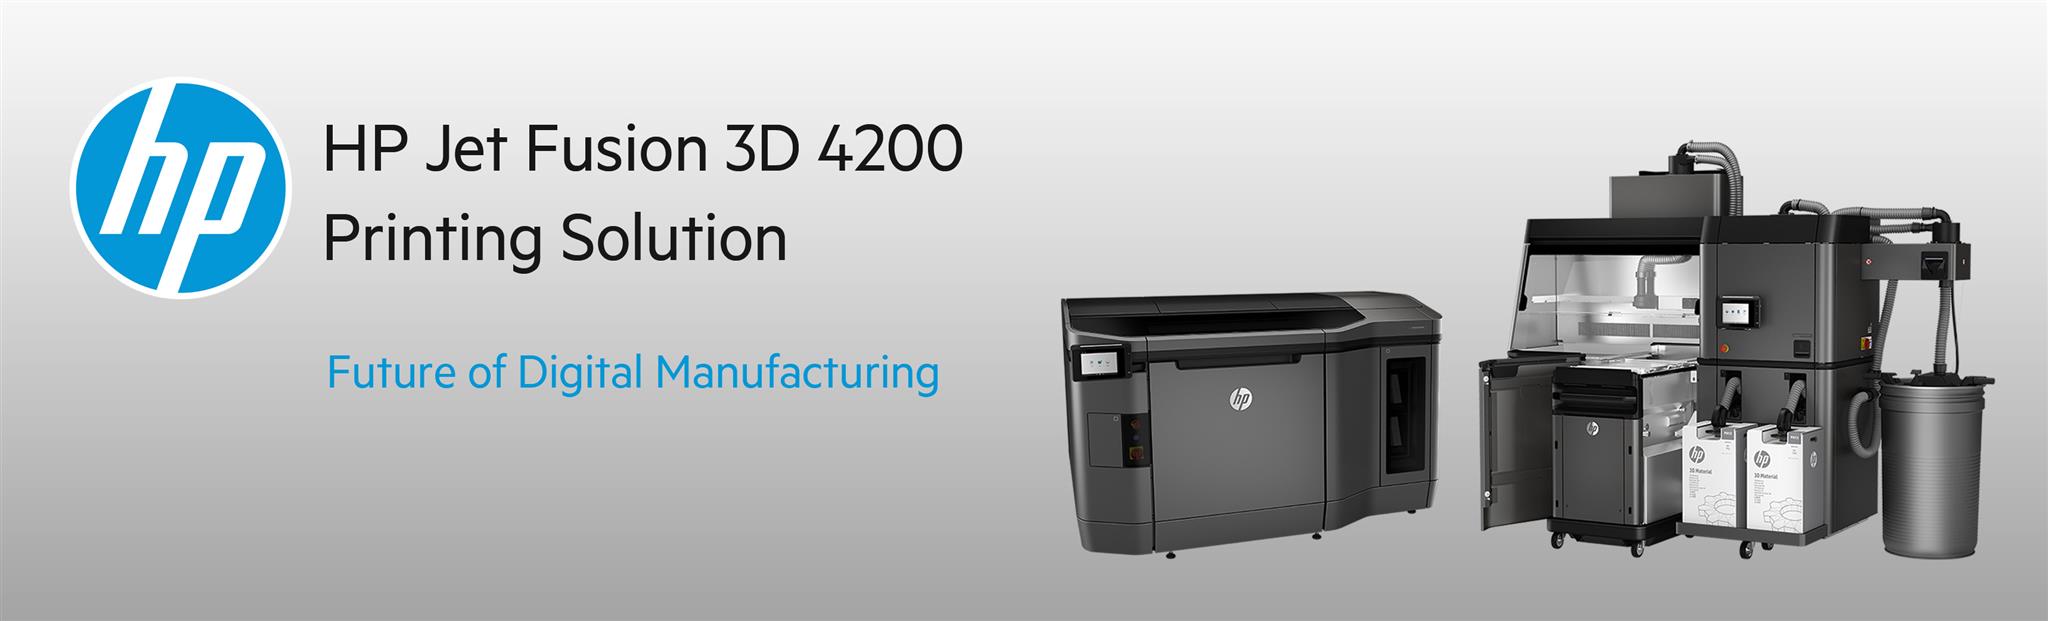 HP-Jet-Fusion-3D-Printing-Solution_Website